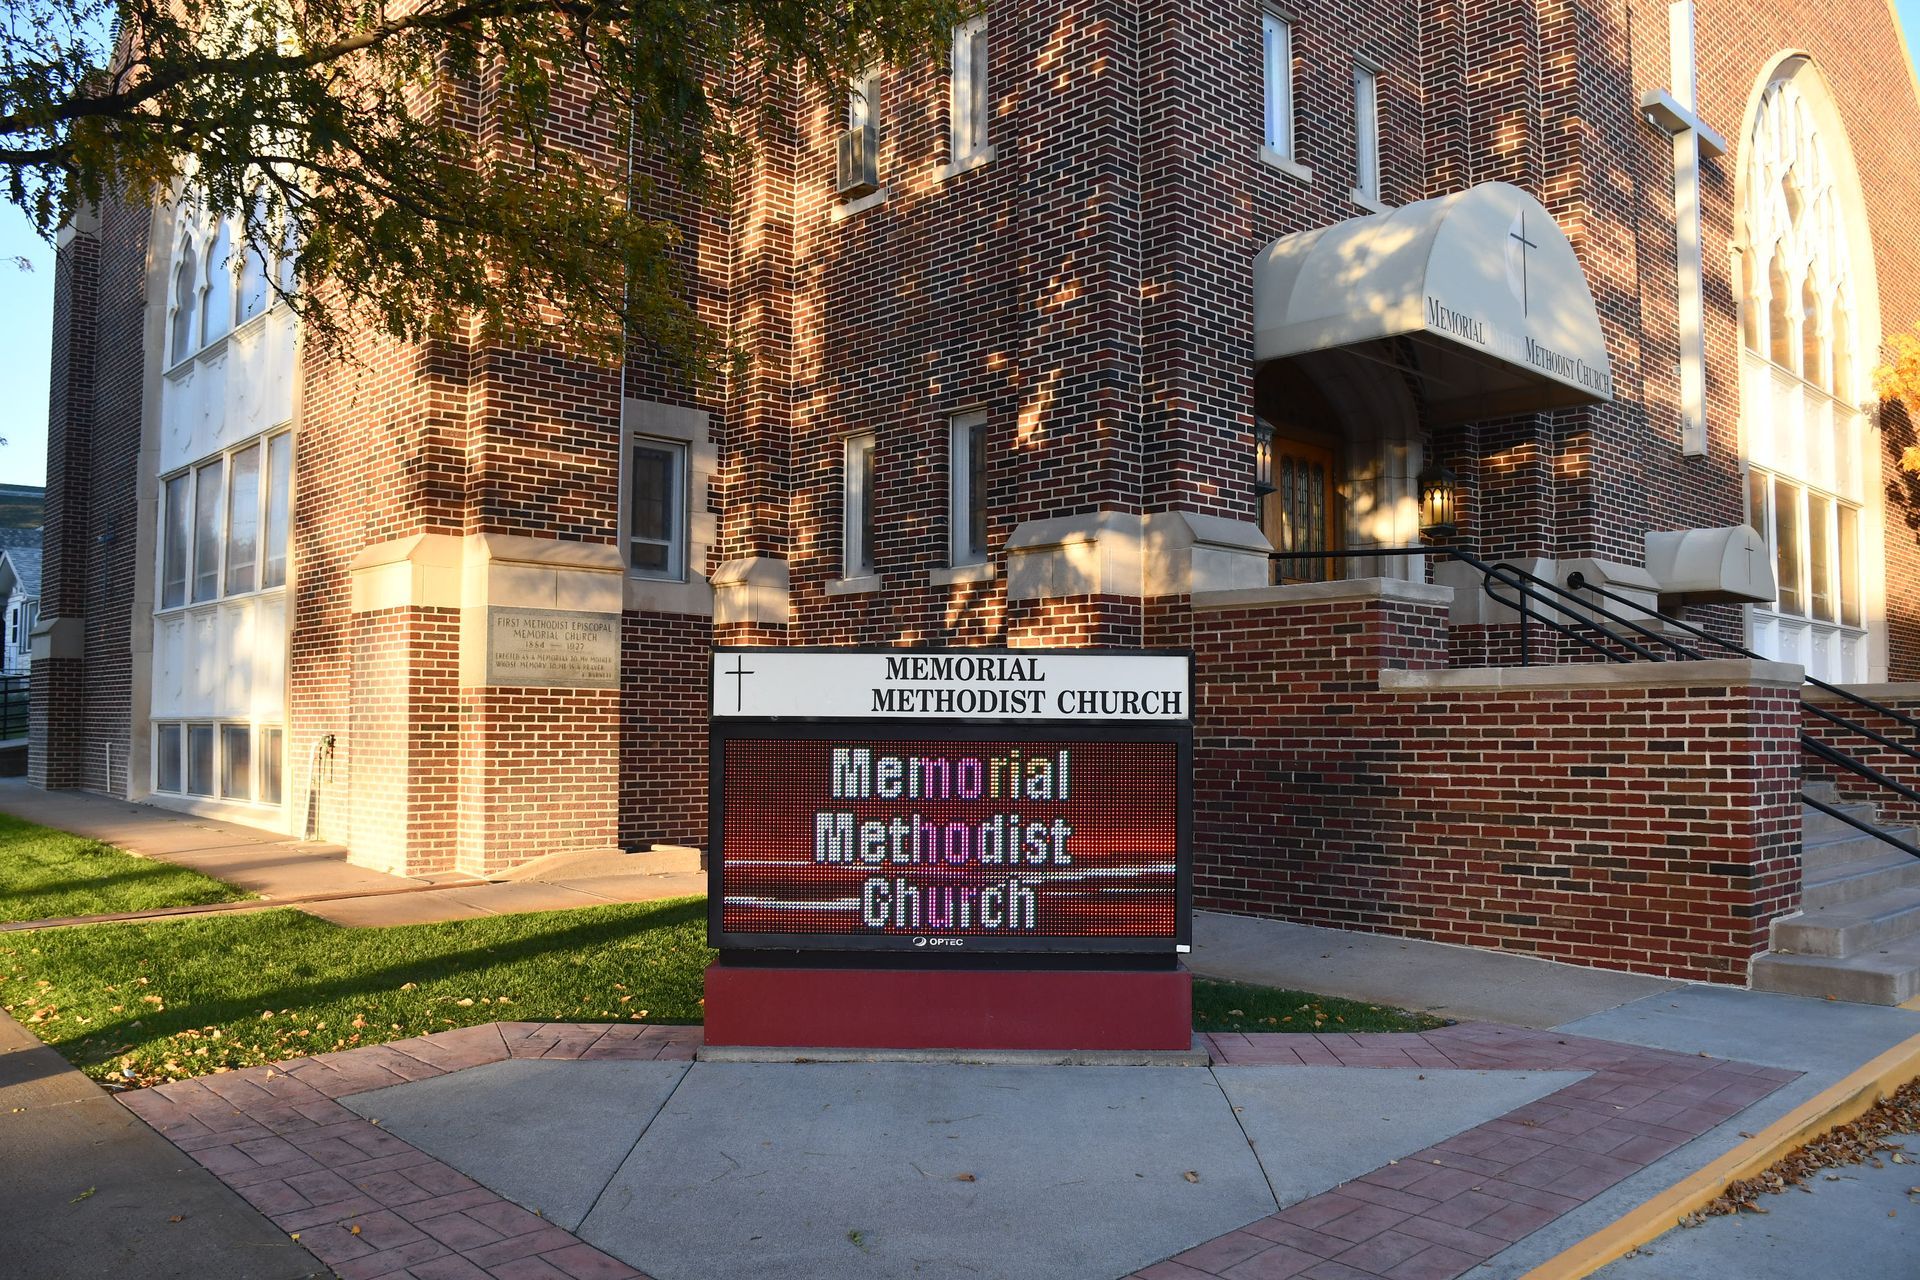 A sign for the Memorial Methodist Church in front of  brick building.